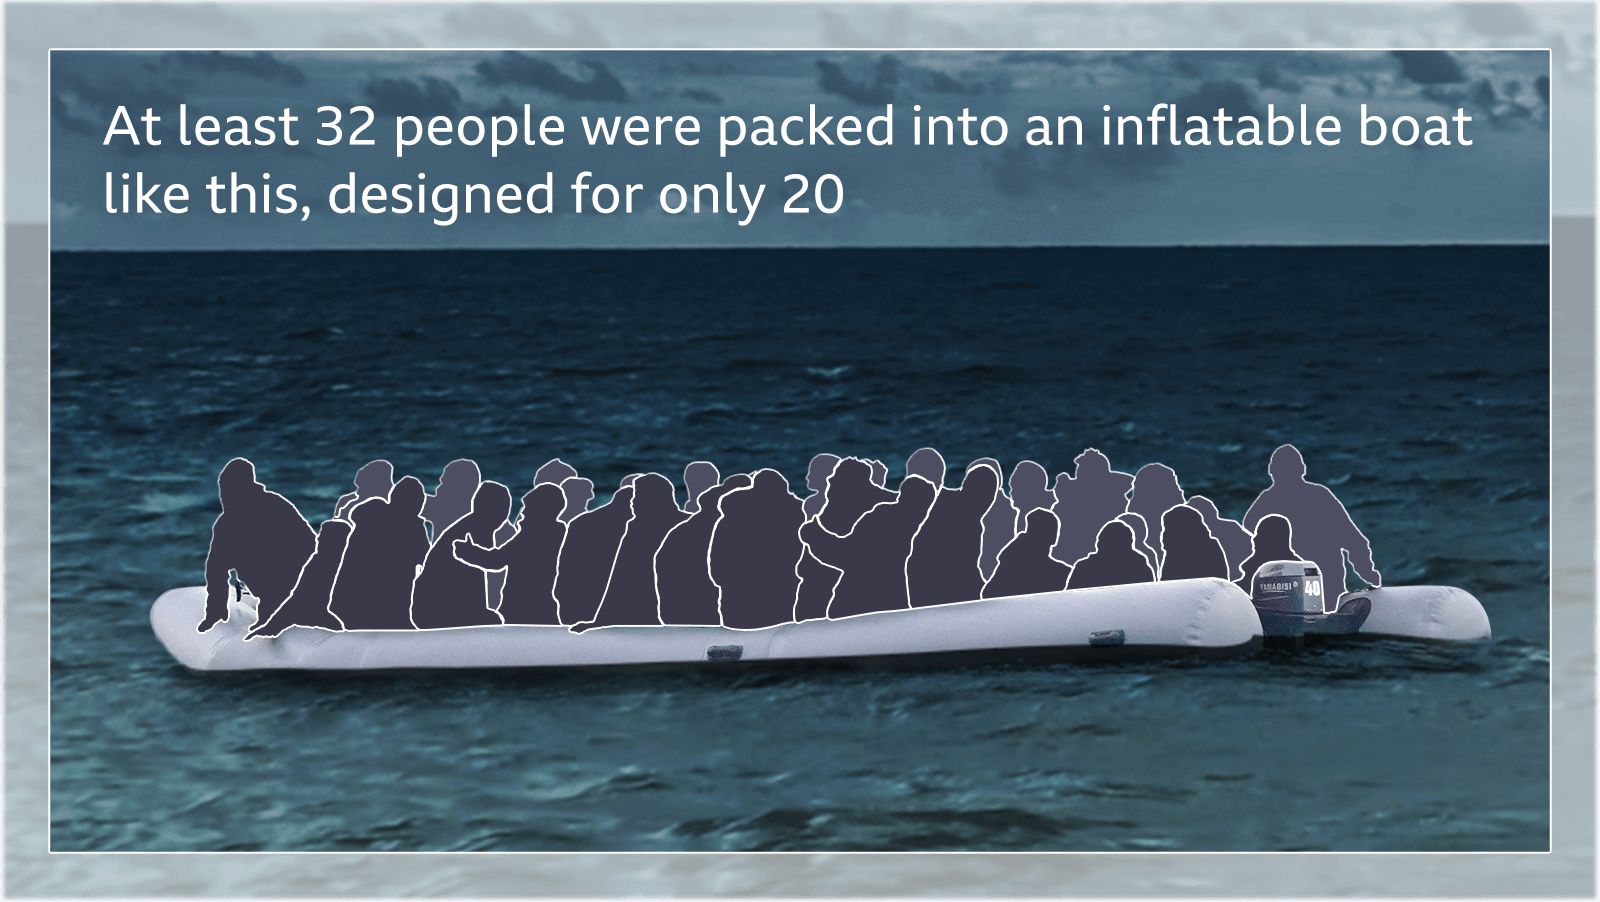 Infographic of a boat similar to that taken by the group